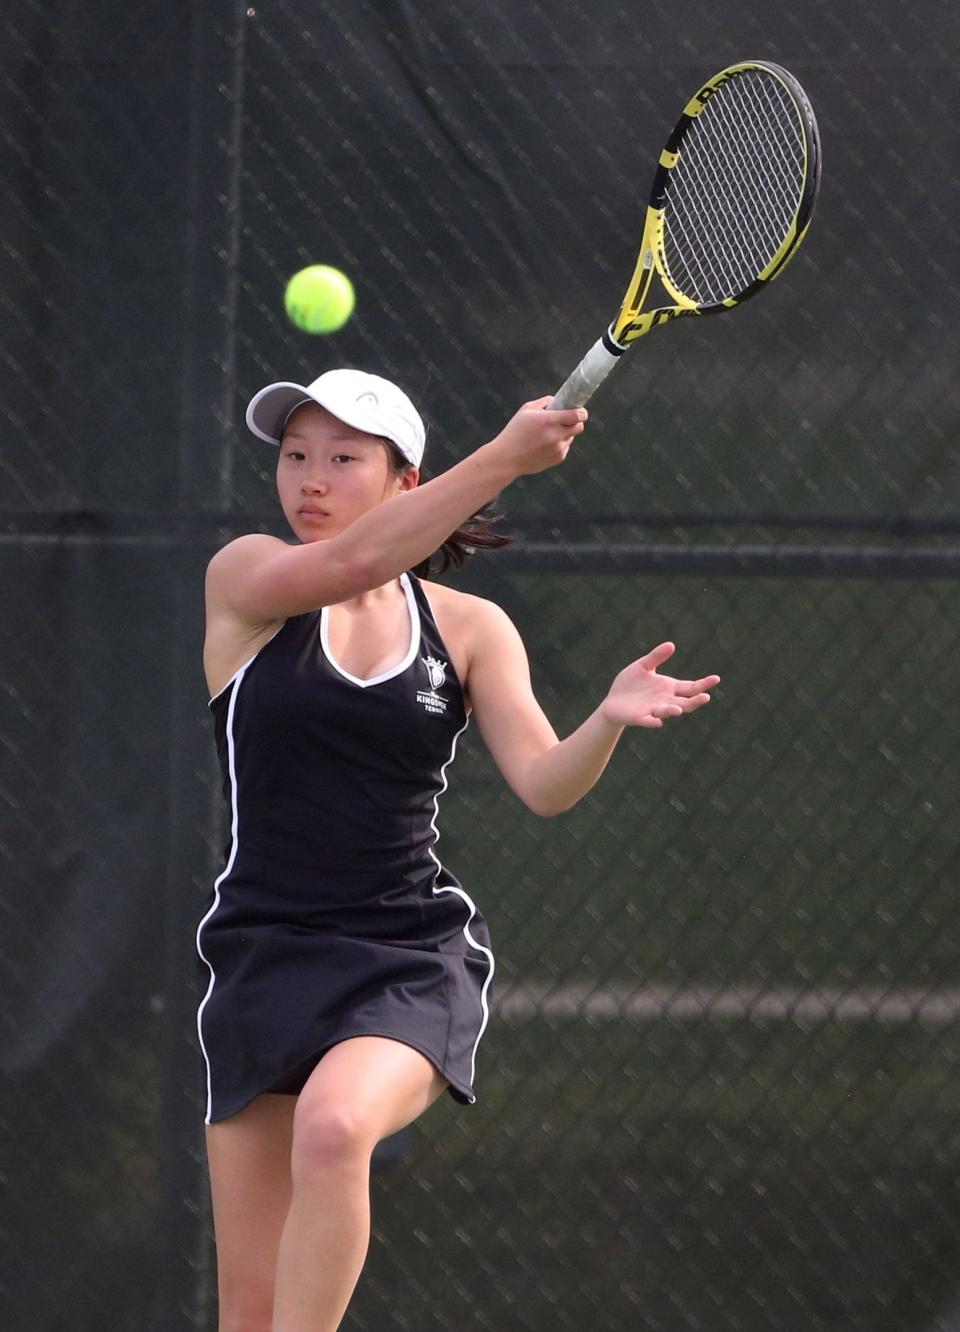 Anna Yoon, No. 3 singles player for Penn, makes a shot against Saint Joseph's Lily Mayfield Thursday, April 20, 2023, in an NIC girls tennis match at Leeper Park Tennis courts in South Bend.